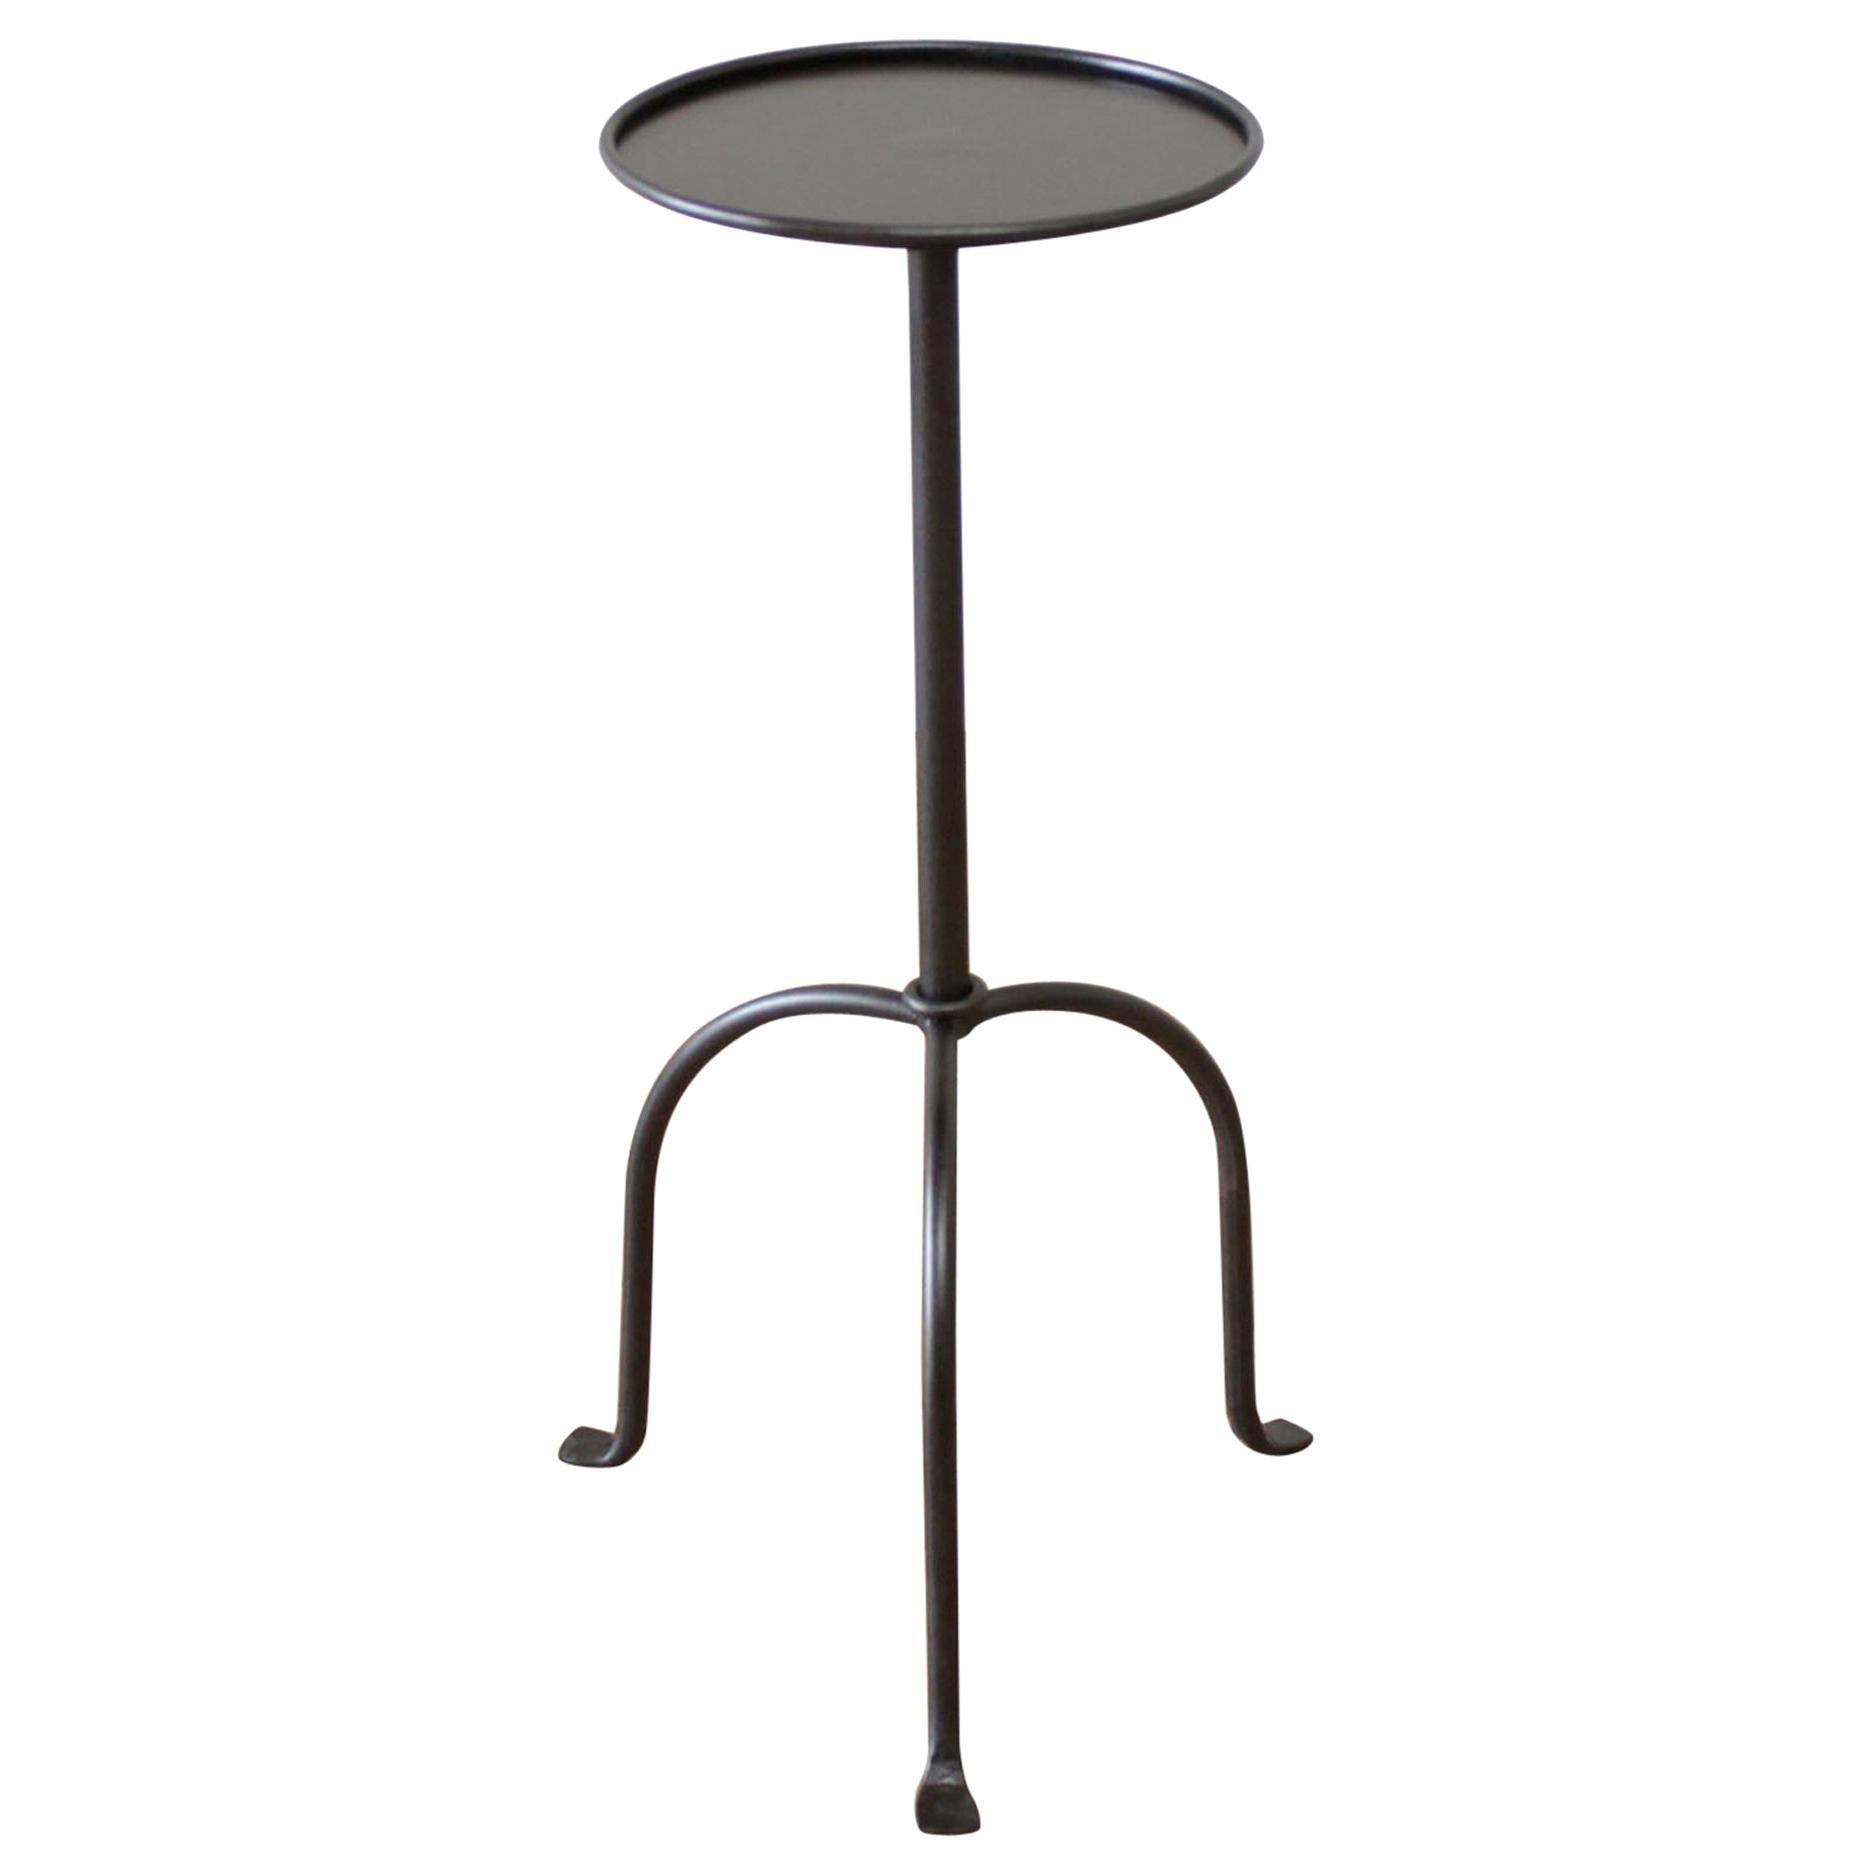 Lido Small Drink Table in Iron or Antique Brass Finish